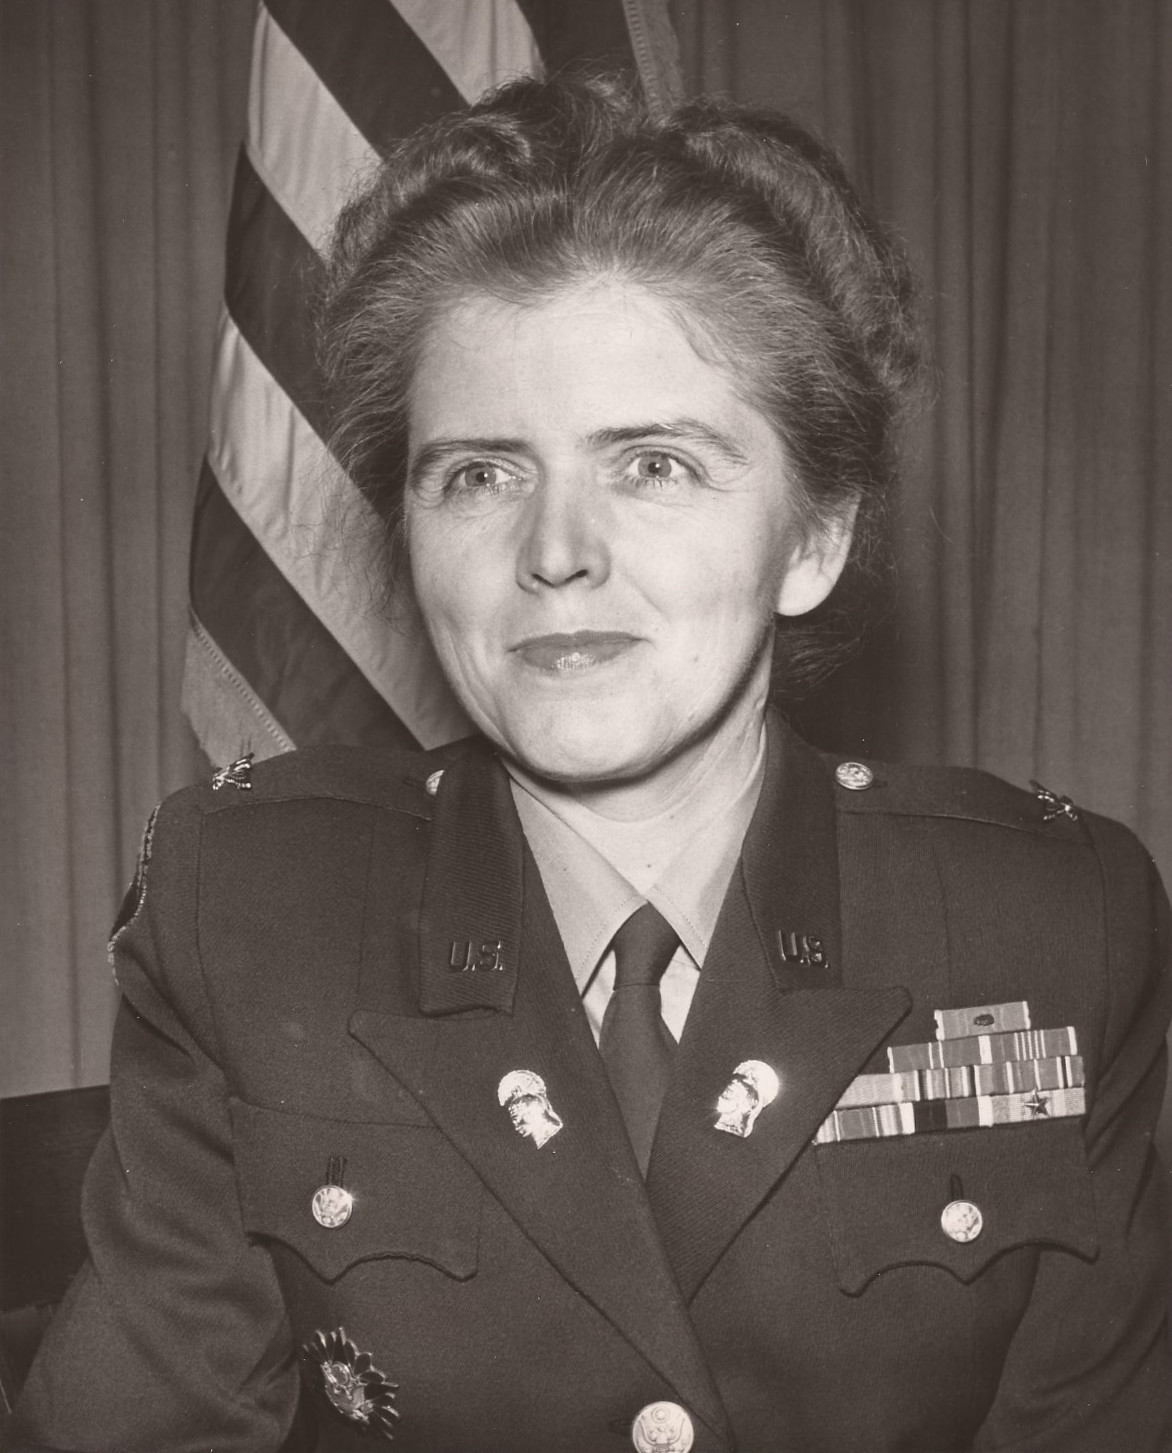 Colonel Mary Hallaren, one of many amazing women in the military